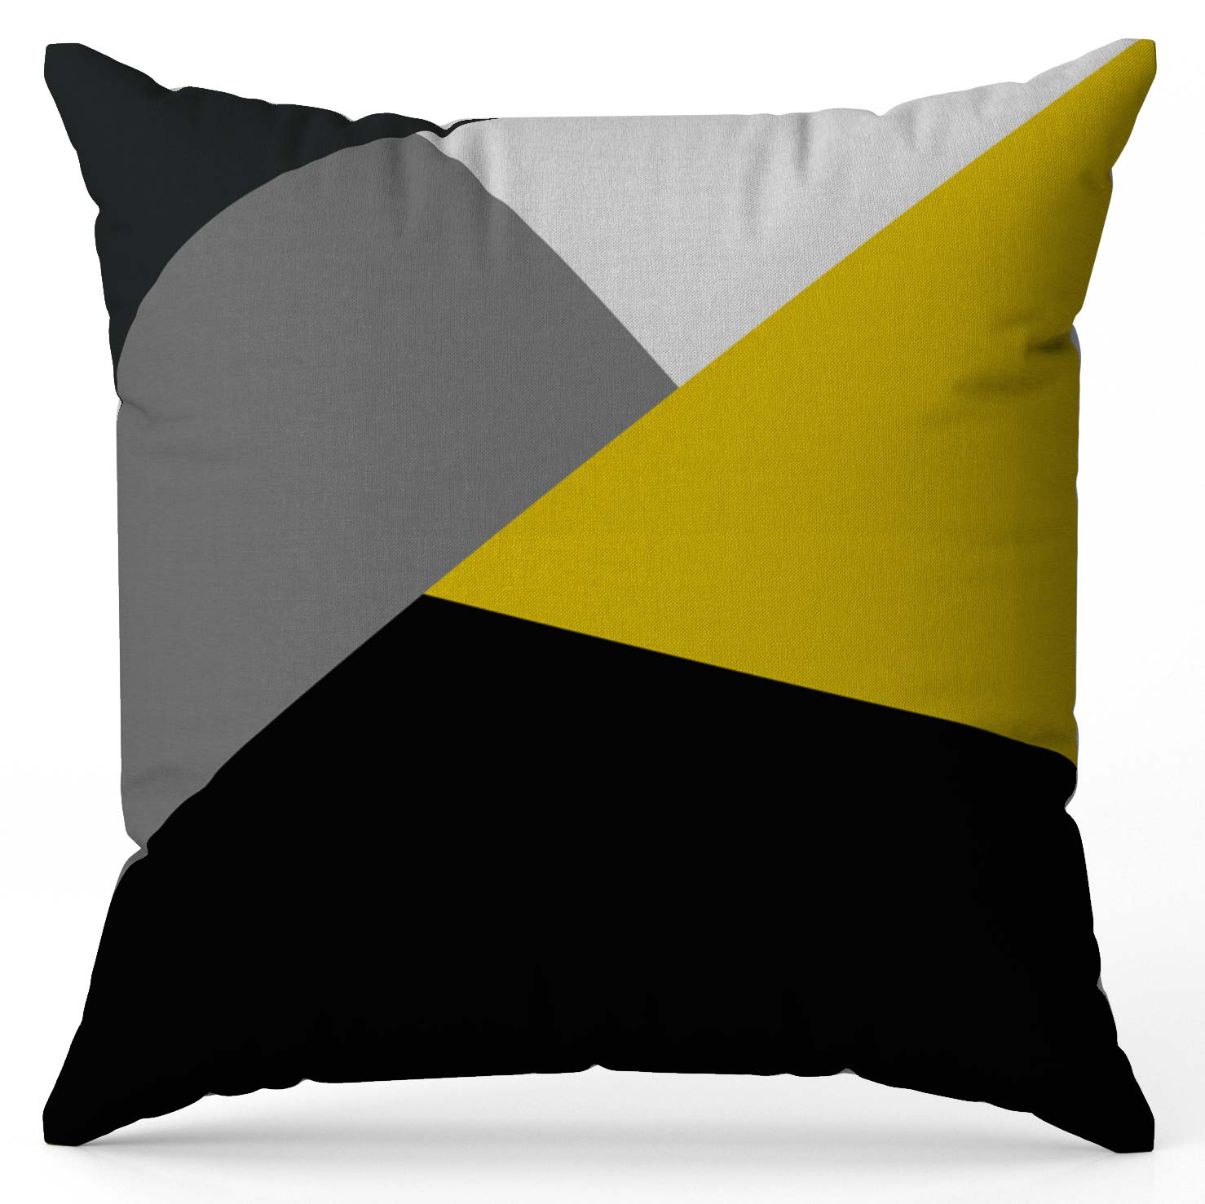 Victoria's Yellow Cushion Cover Trendy Home